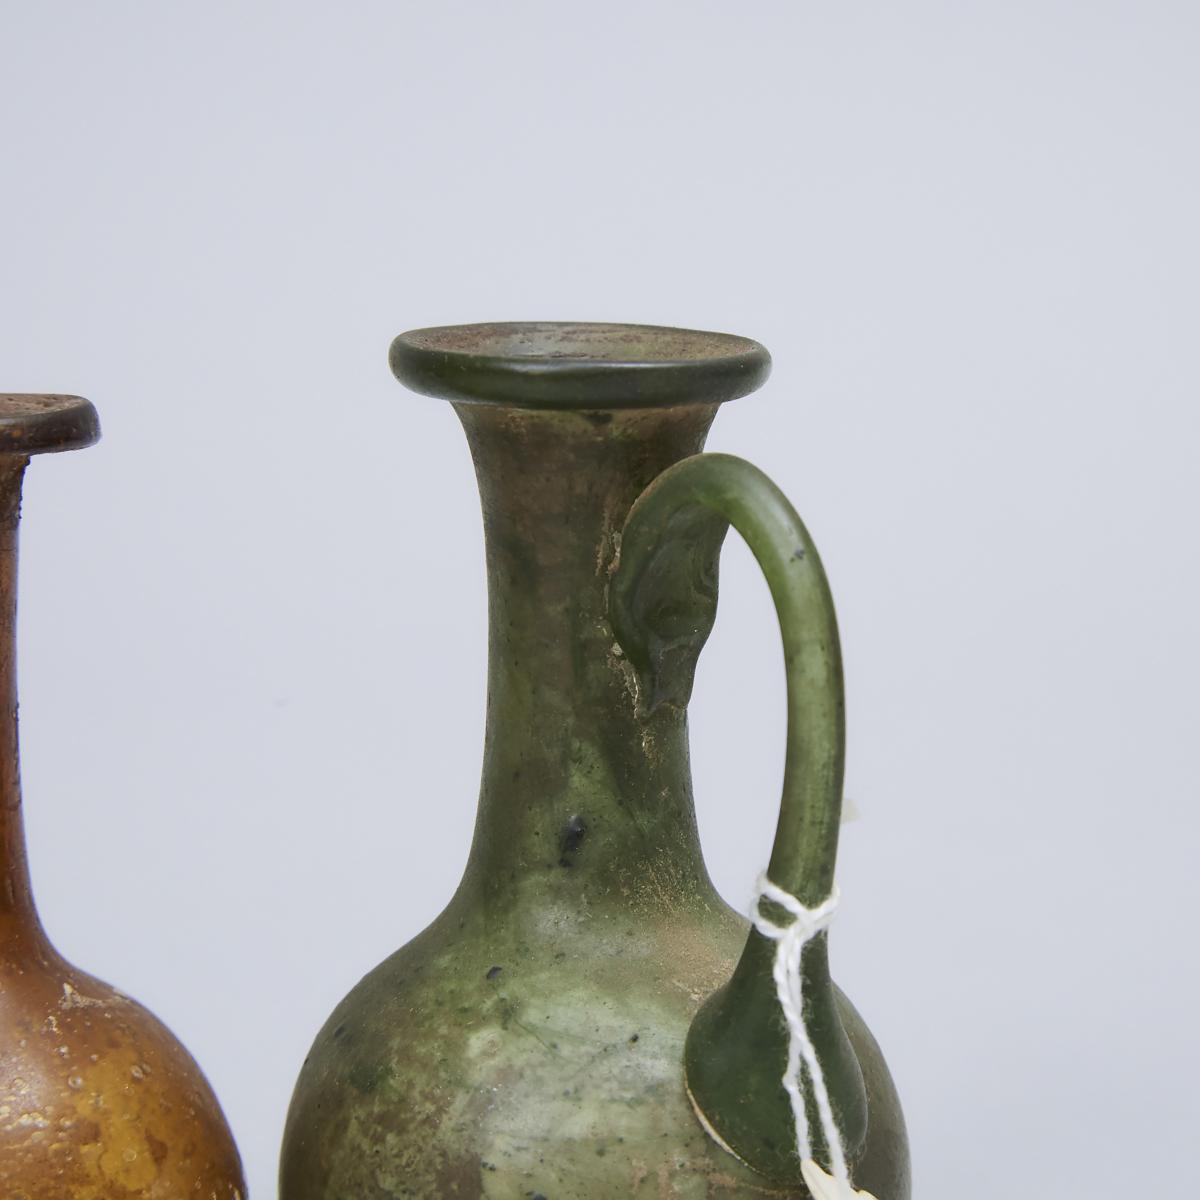 Two Roman Glass Juglets, 100-200 A.D., height 3.7 in — 9.5 cm - Image 4 of 5